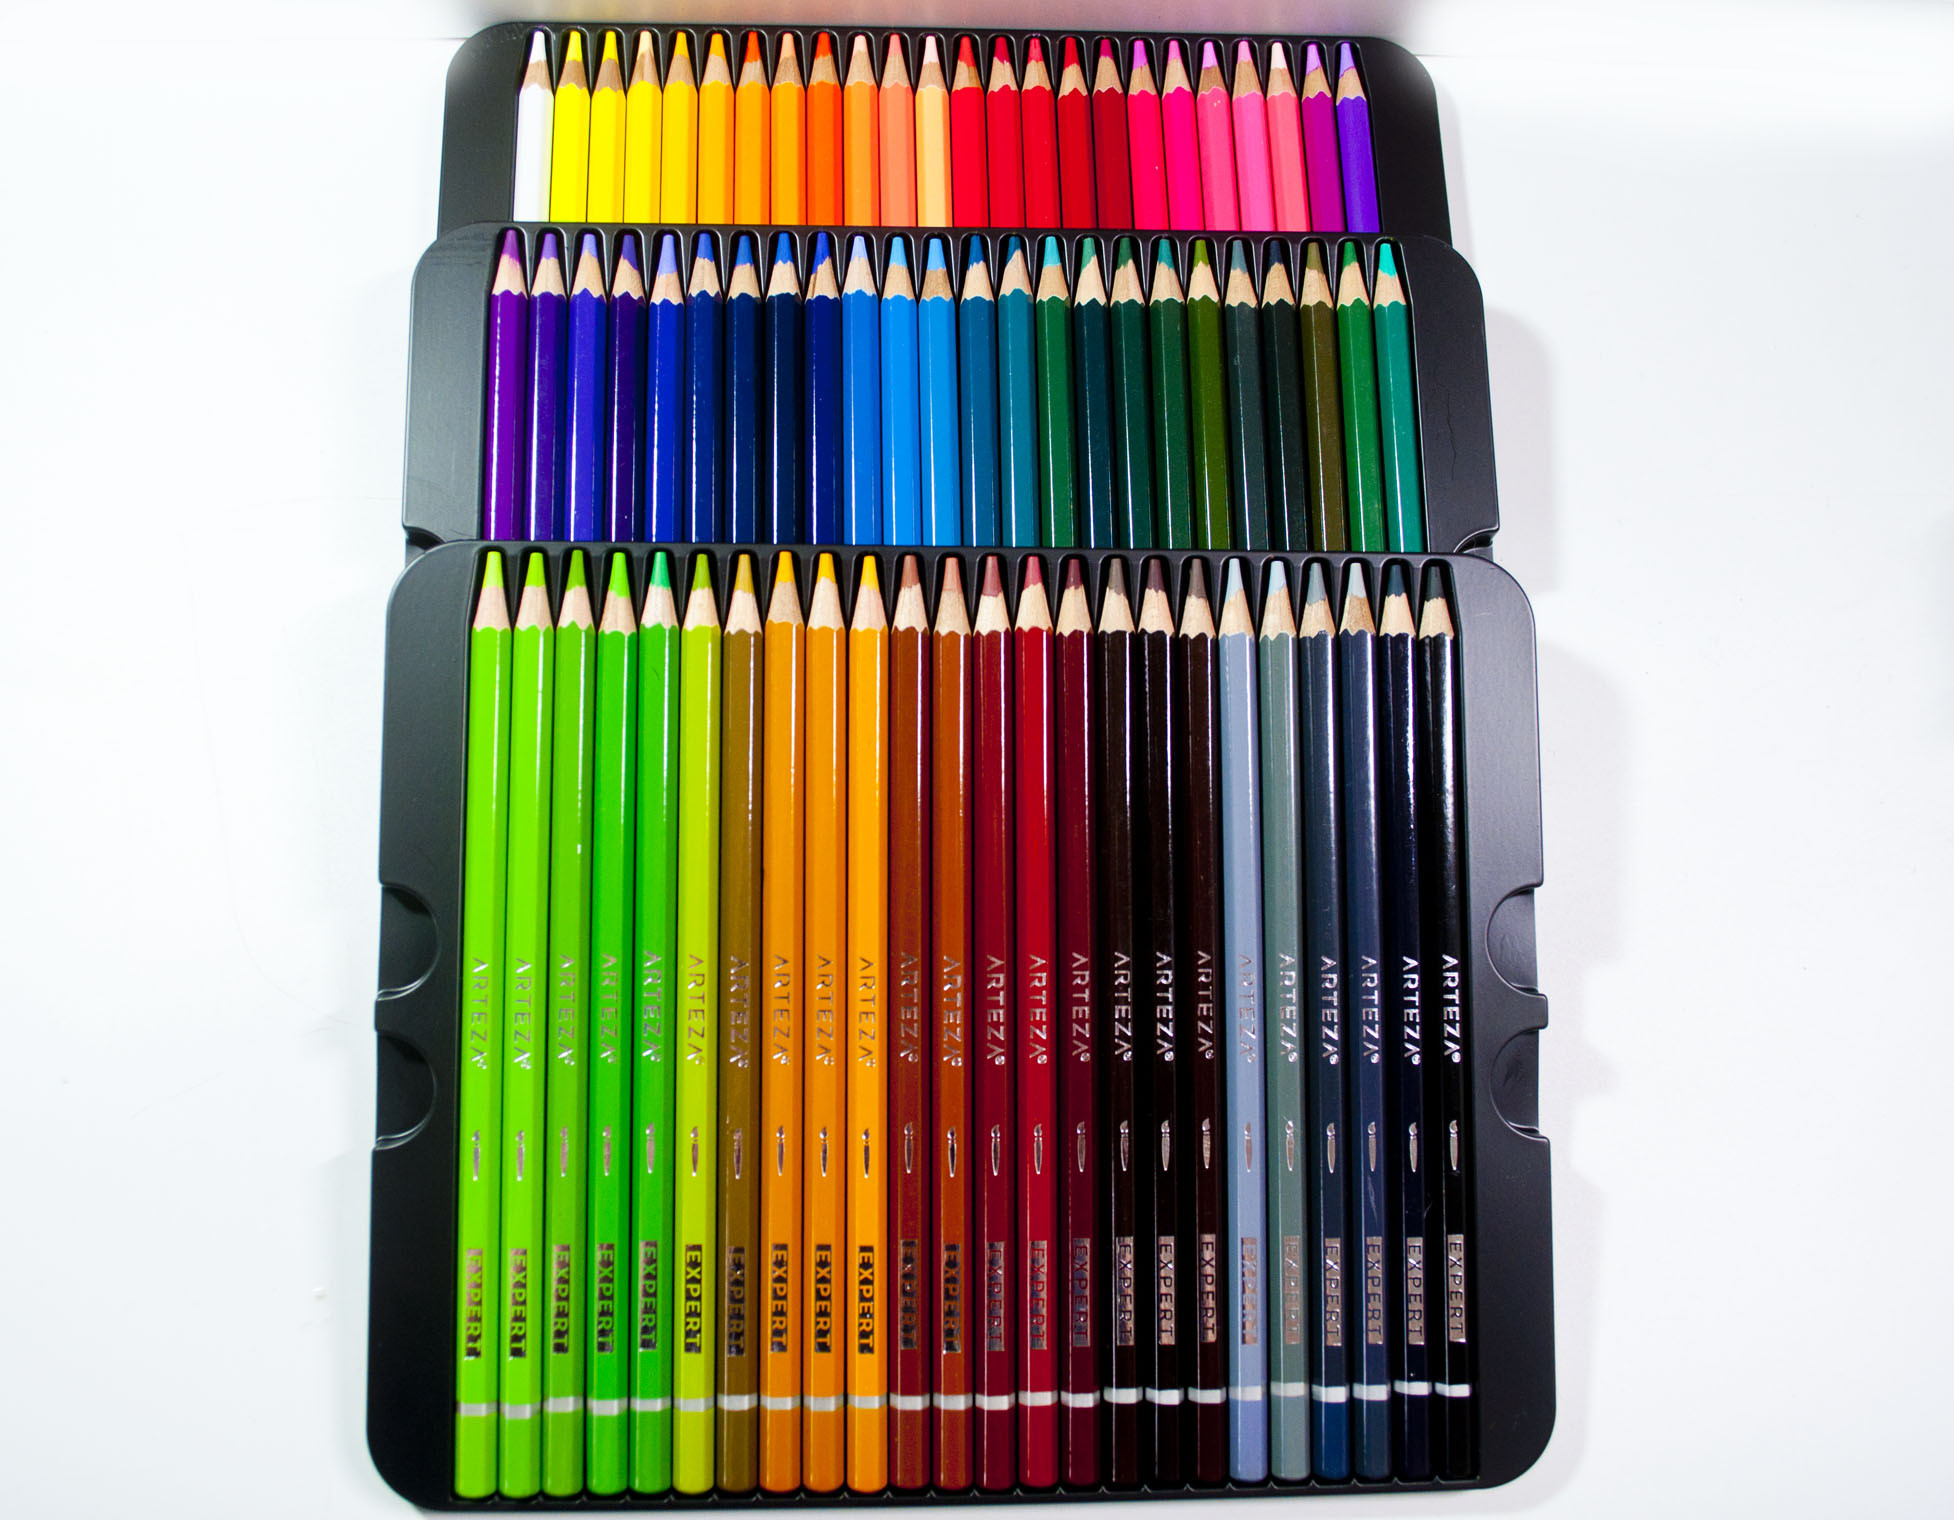 Arteza Watercolor Pencils Expert The Art Gear Guide Arteza colored pencils will give you a feeling of comfort when blending and creating your unique artwork. arteza watercolor pencils expert the